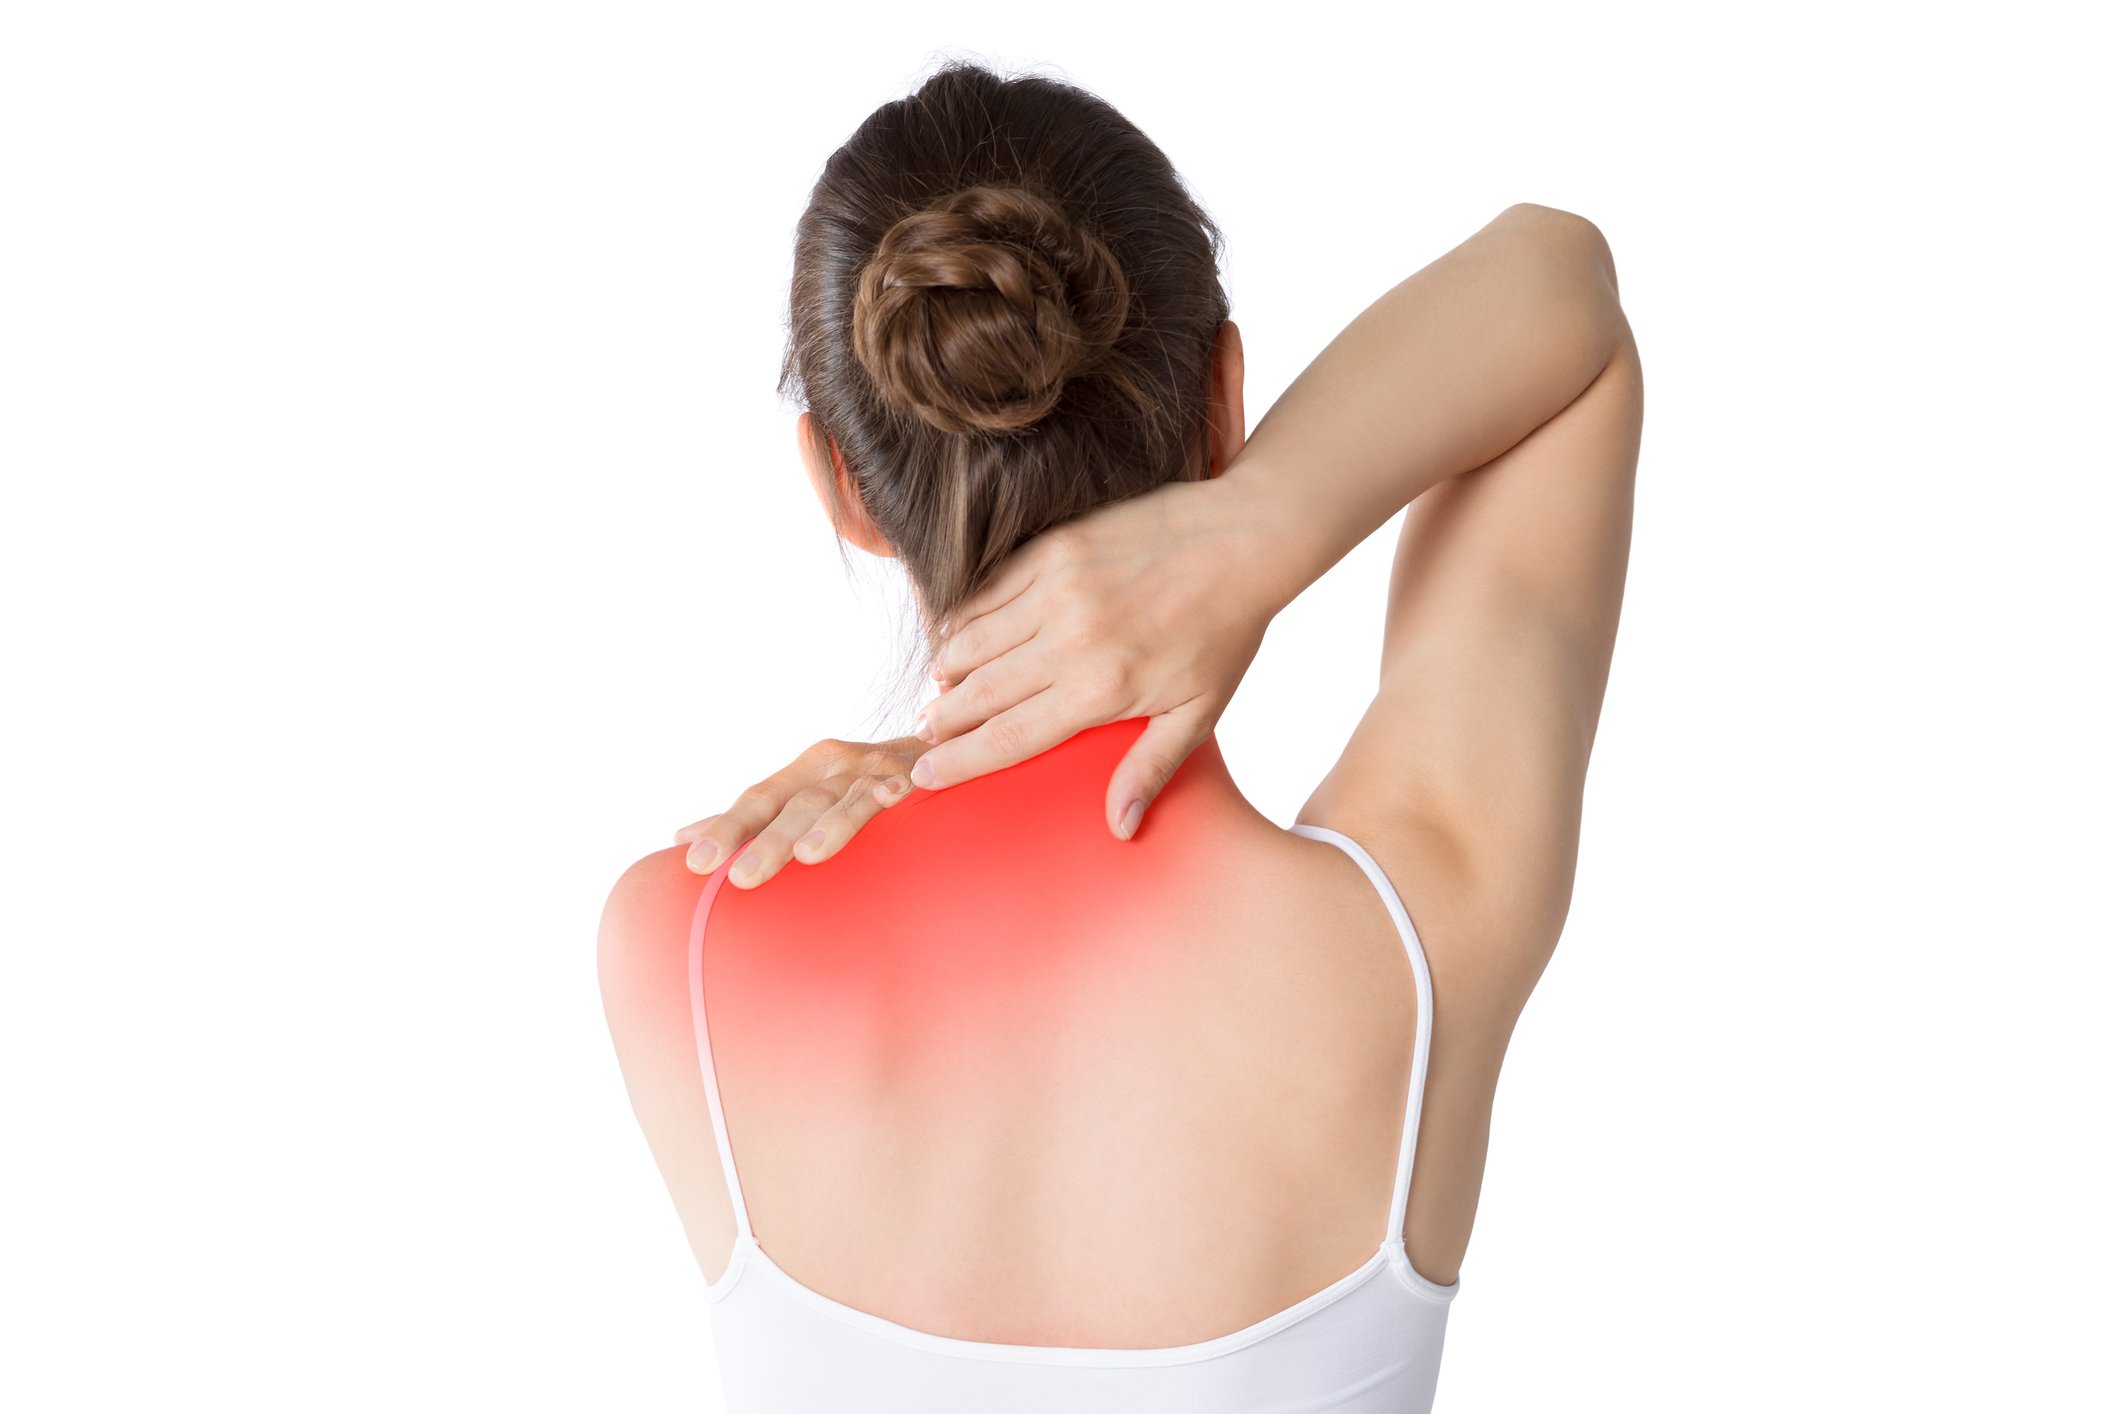 How to relieve shoulder and neck tension when you're sitting down - Musely